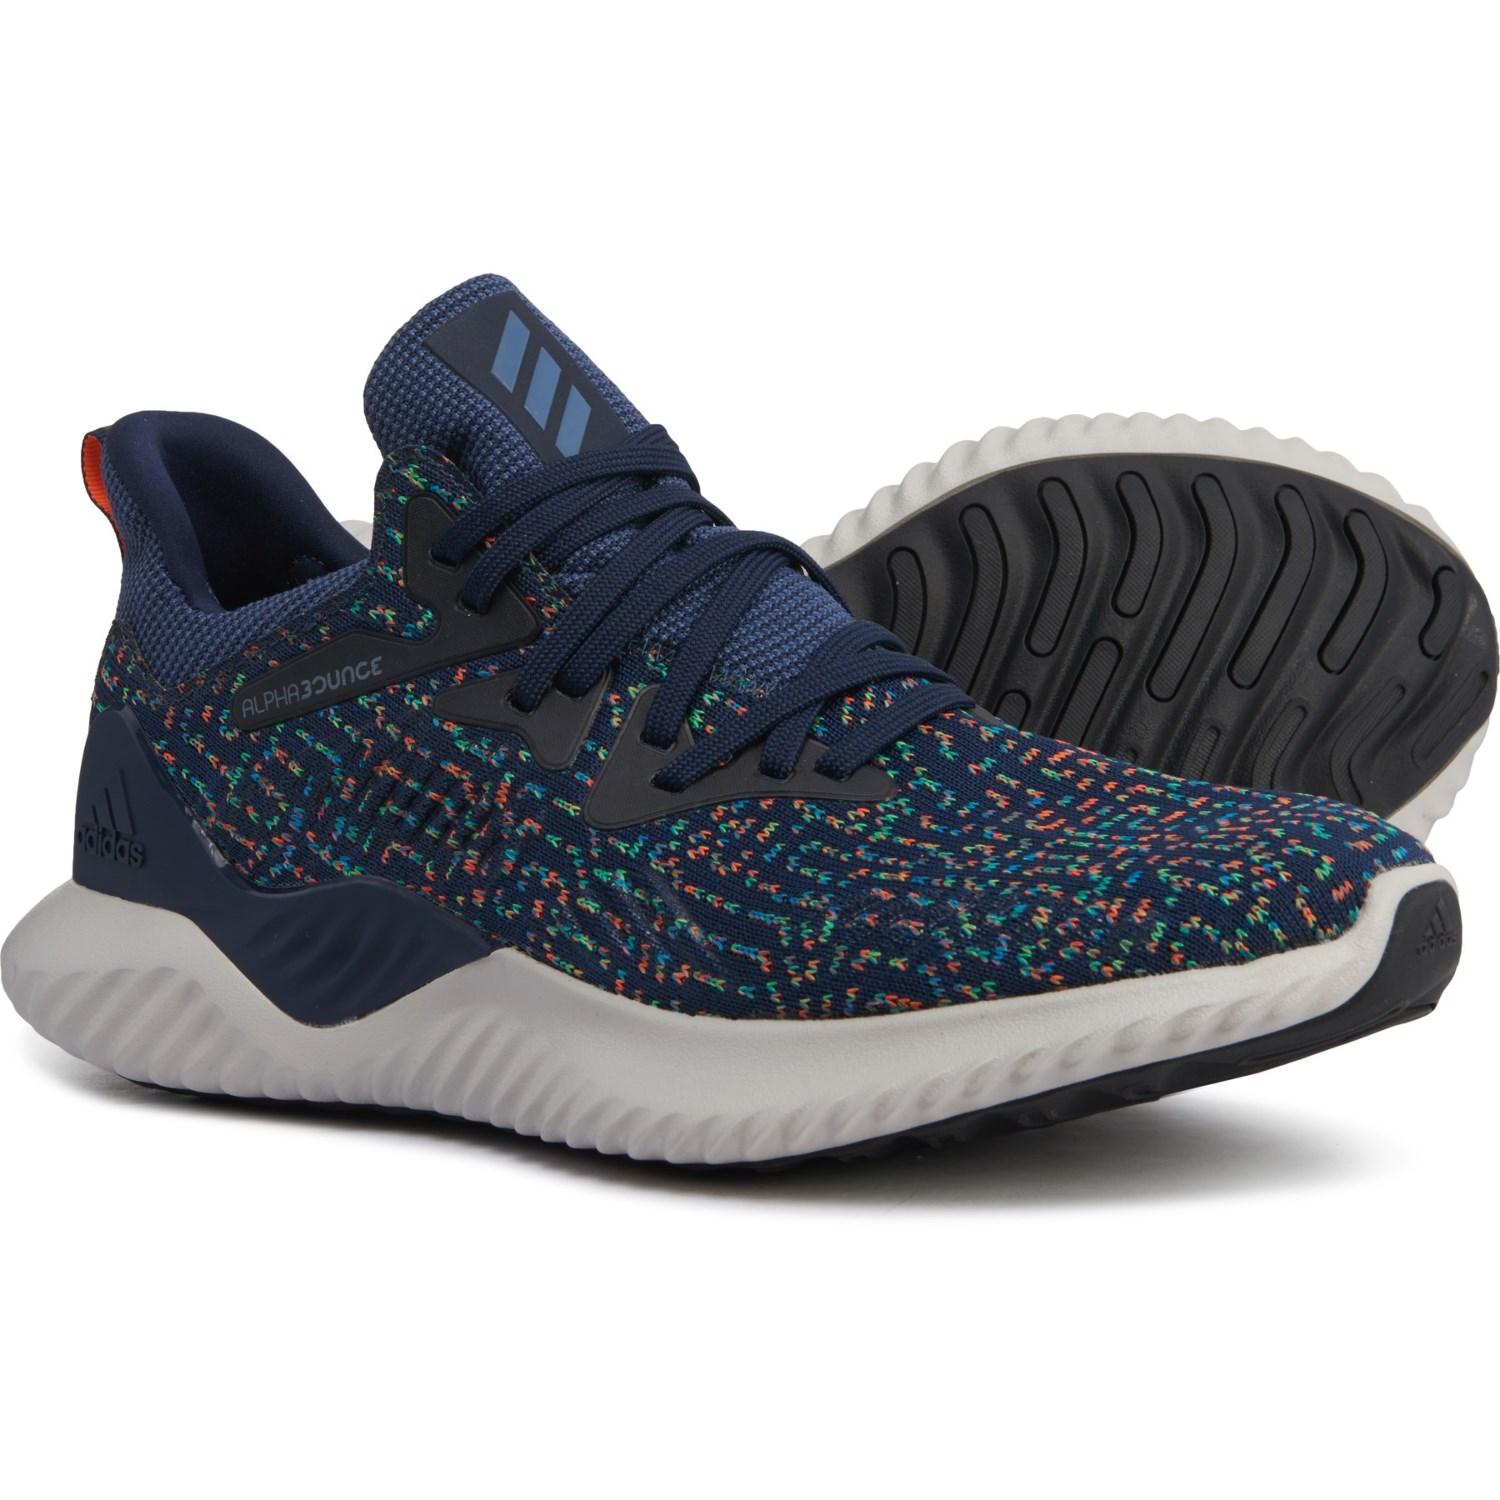 request Secondly Filthy Alphabounce Beyond Ck U.K., SAVE 30% - aveclumiere.com